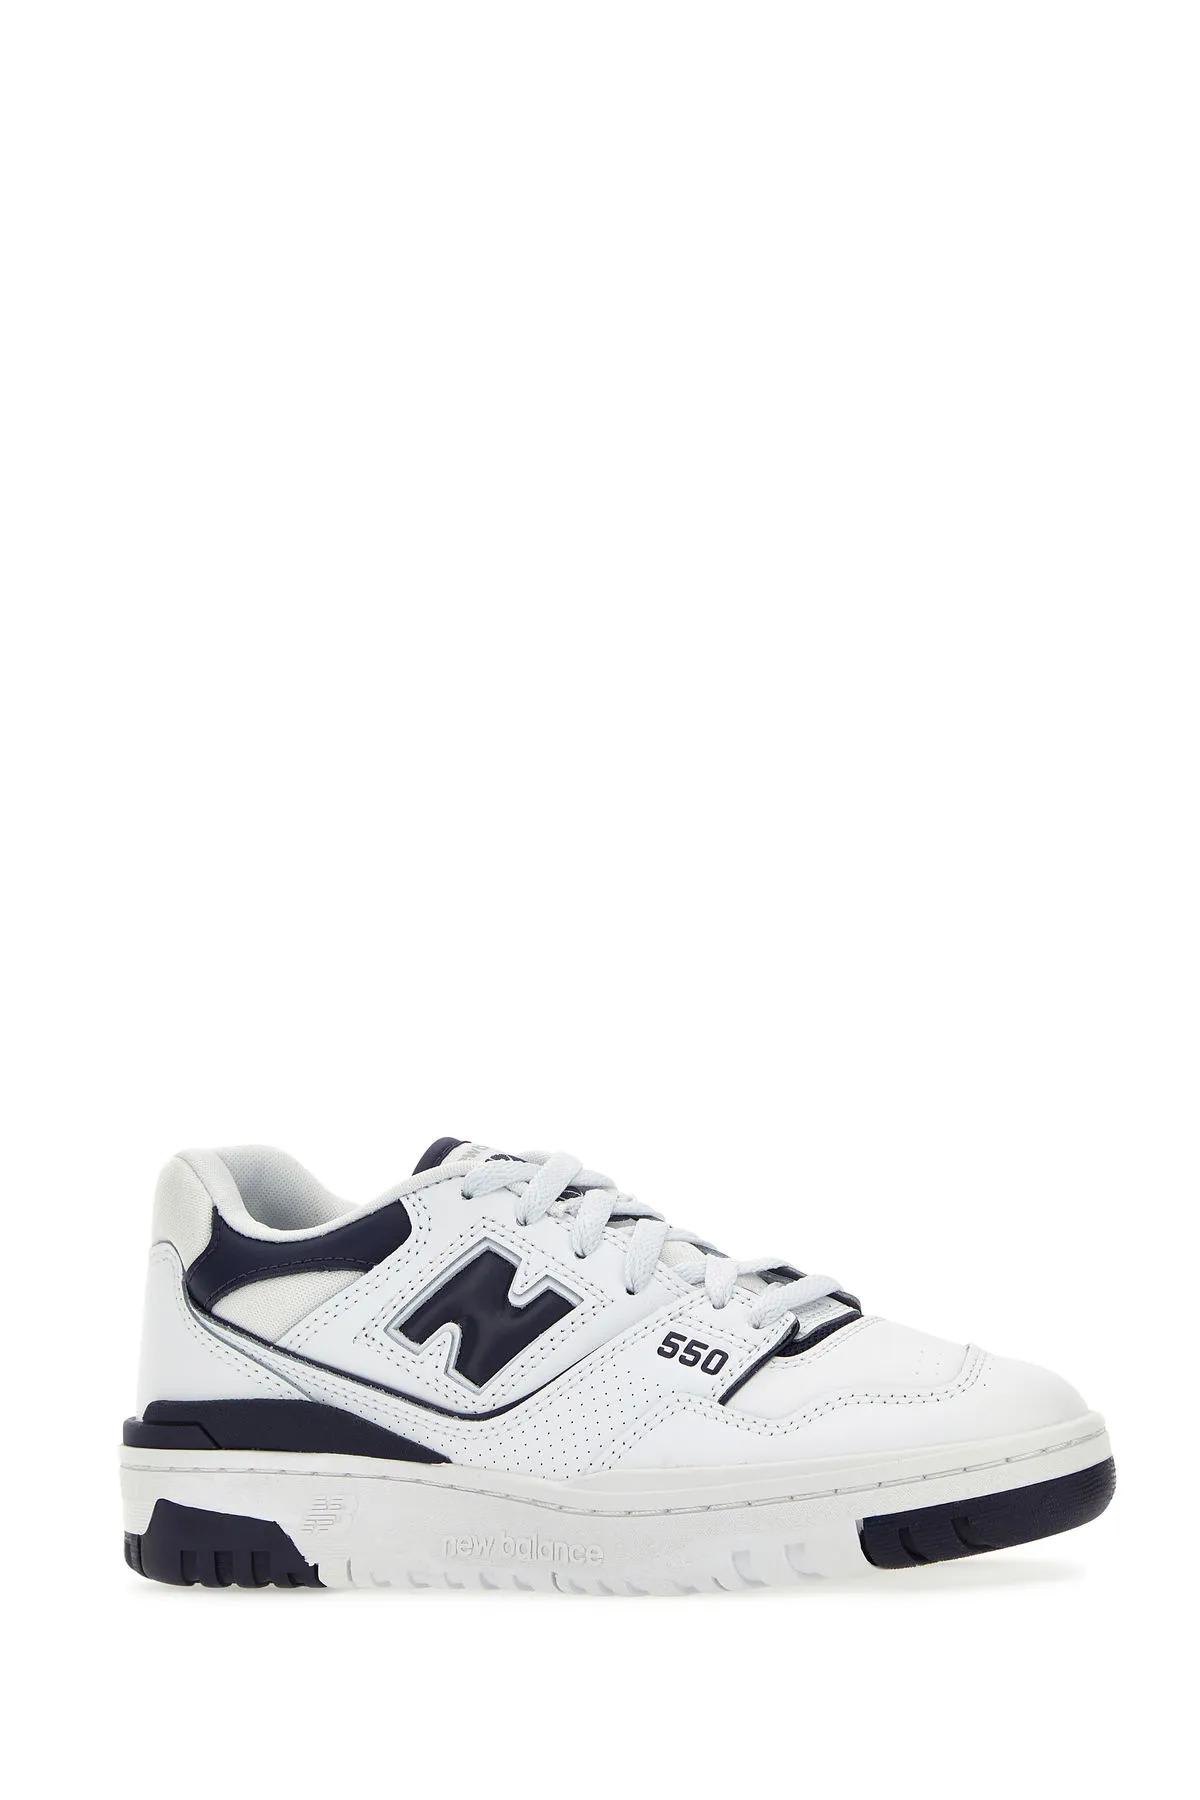 Shop New Balance Two-tone Leather 550 Sneakers In White